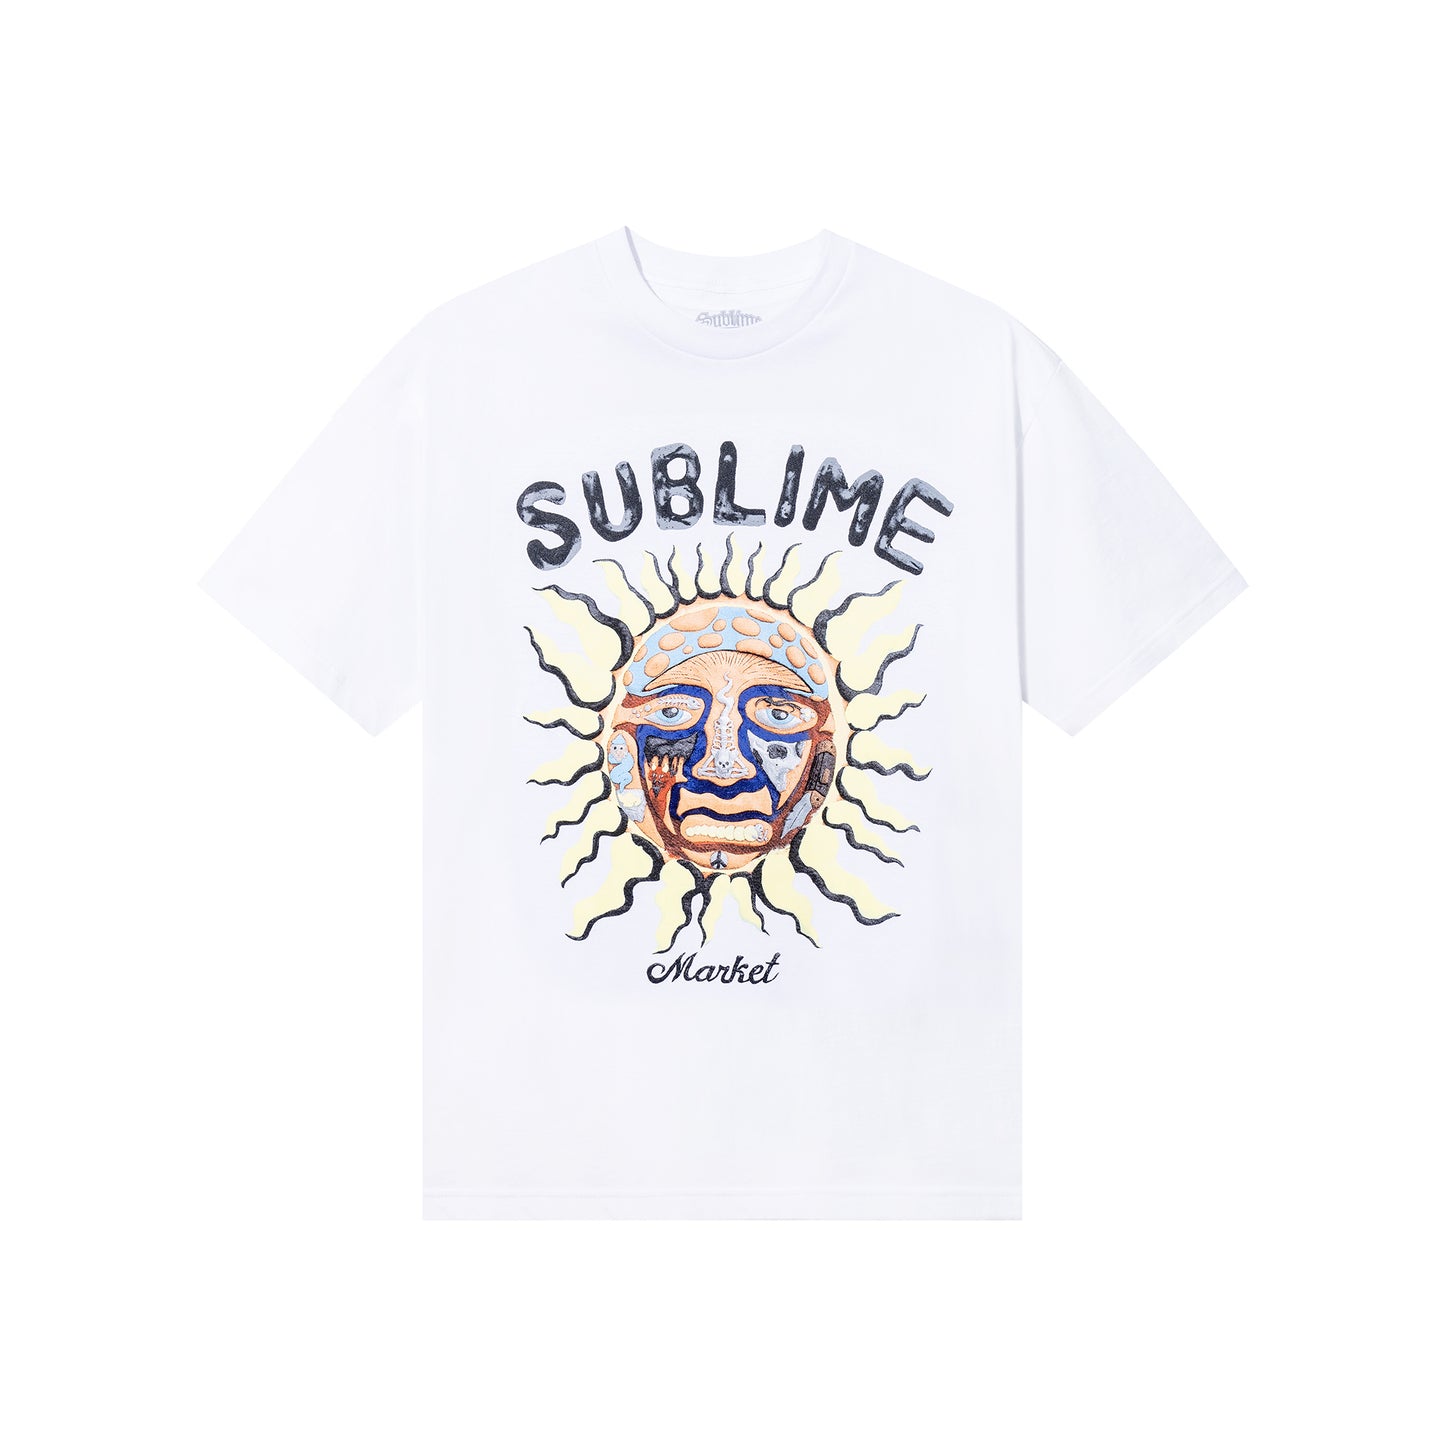 MARKET clothing brand MKT SUBLIME FREEDOM SUN T-SHIRT. Find more graphic tees, hats, hoodies and more at MarketStudios.com. Formally Chinatown Market.